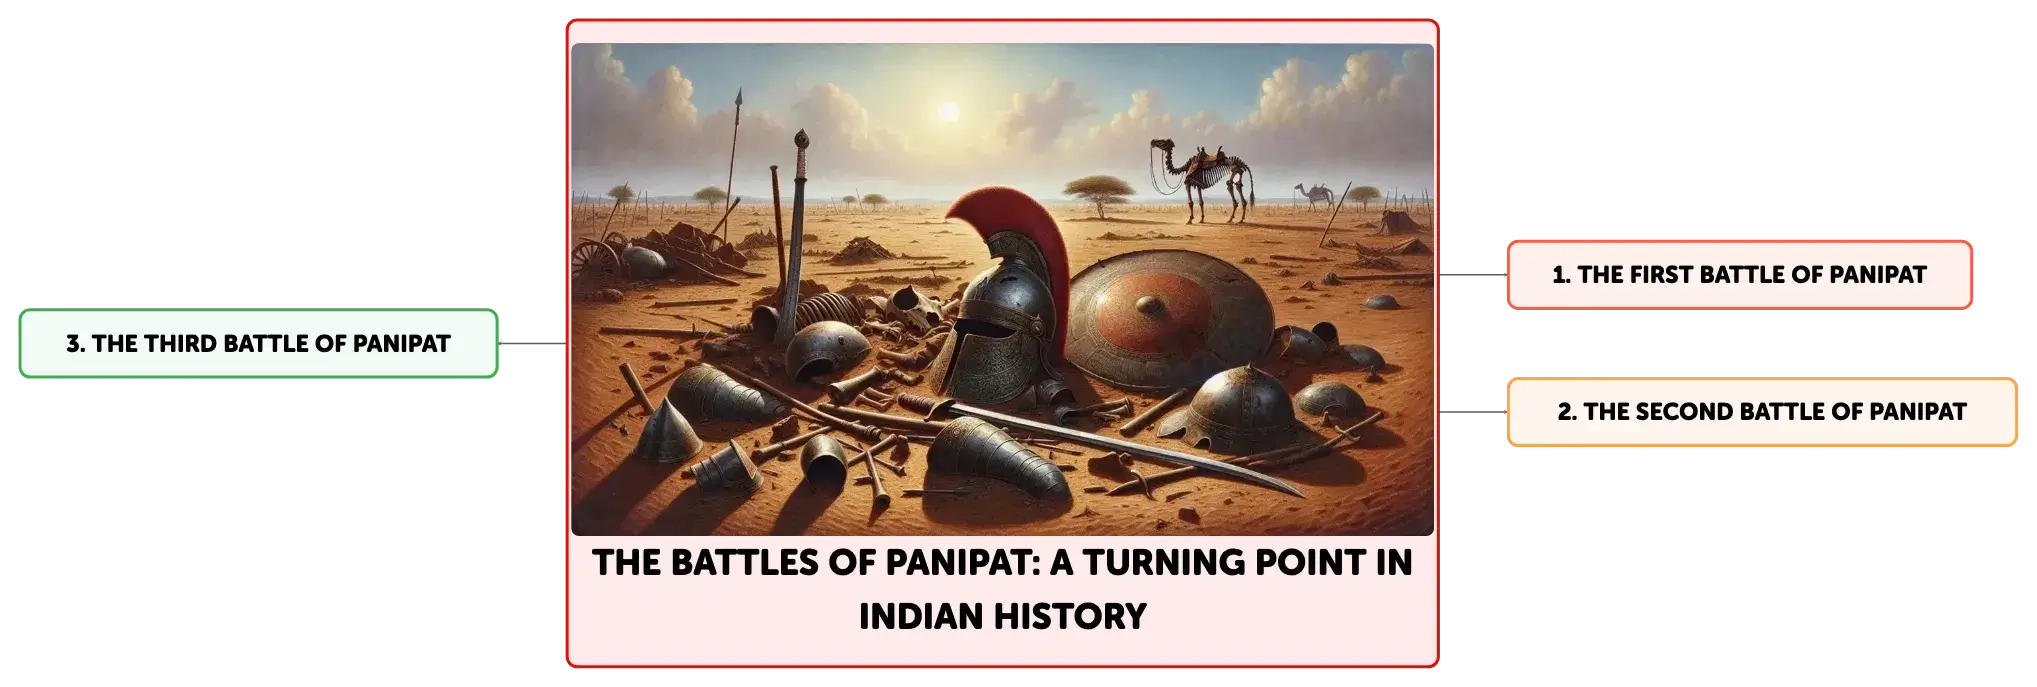 essay on first battle of panipat